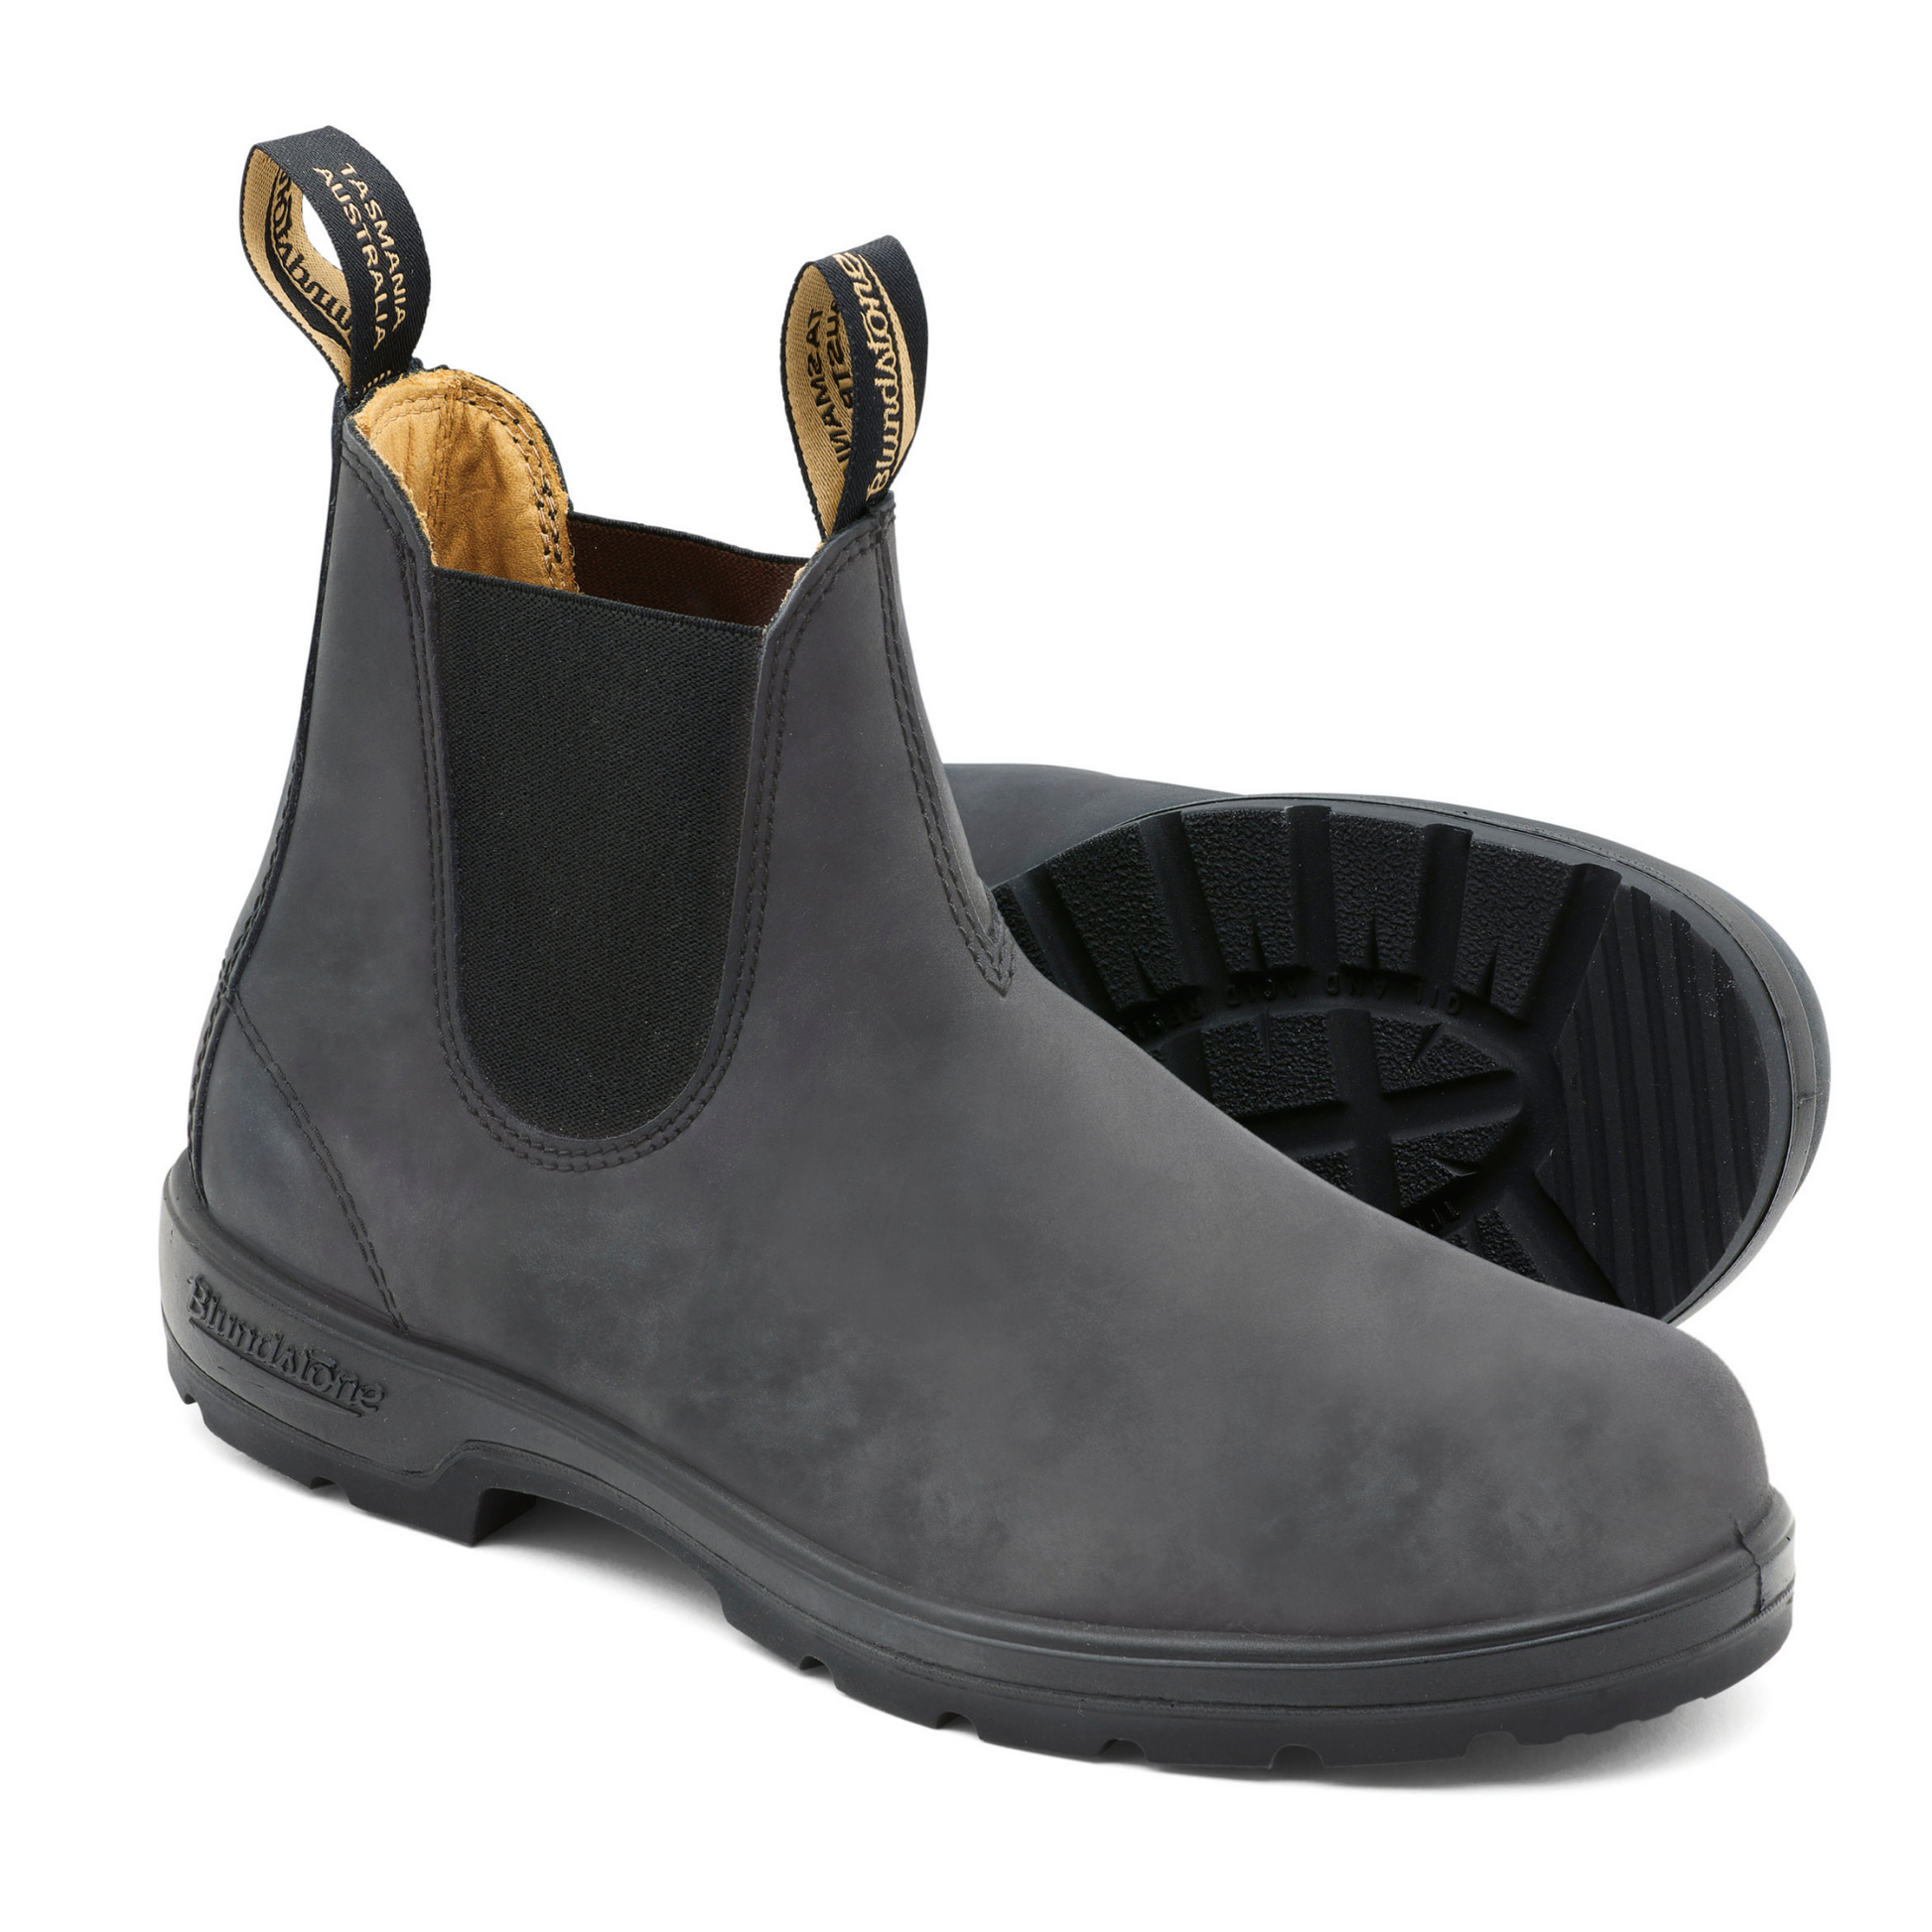 A pair of grey leather boots with tan coloured interior lining and black elastic sides.